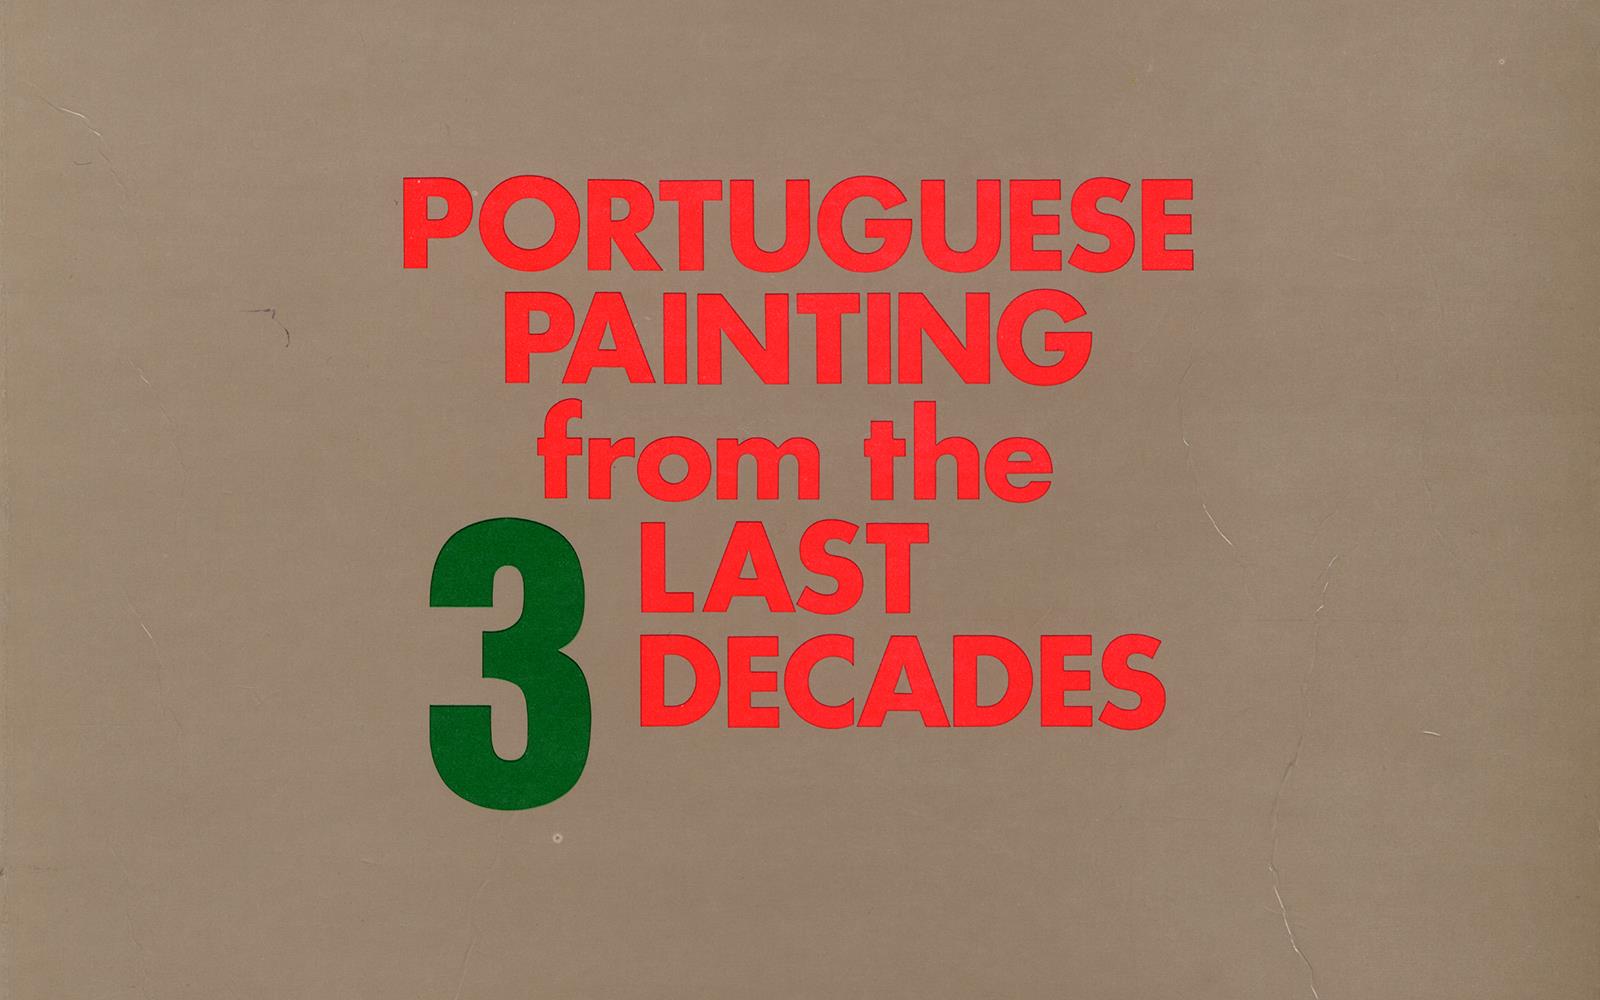 Portuguese Painting from the Last 3 Decades